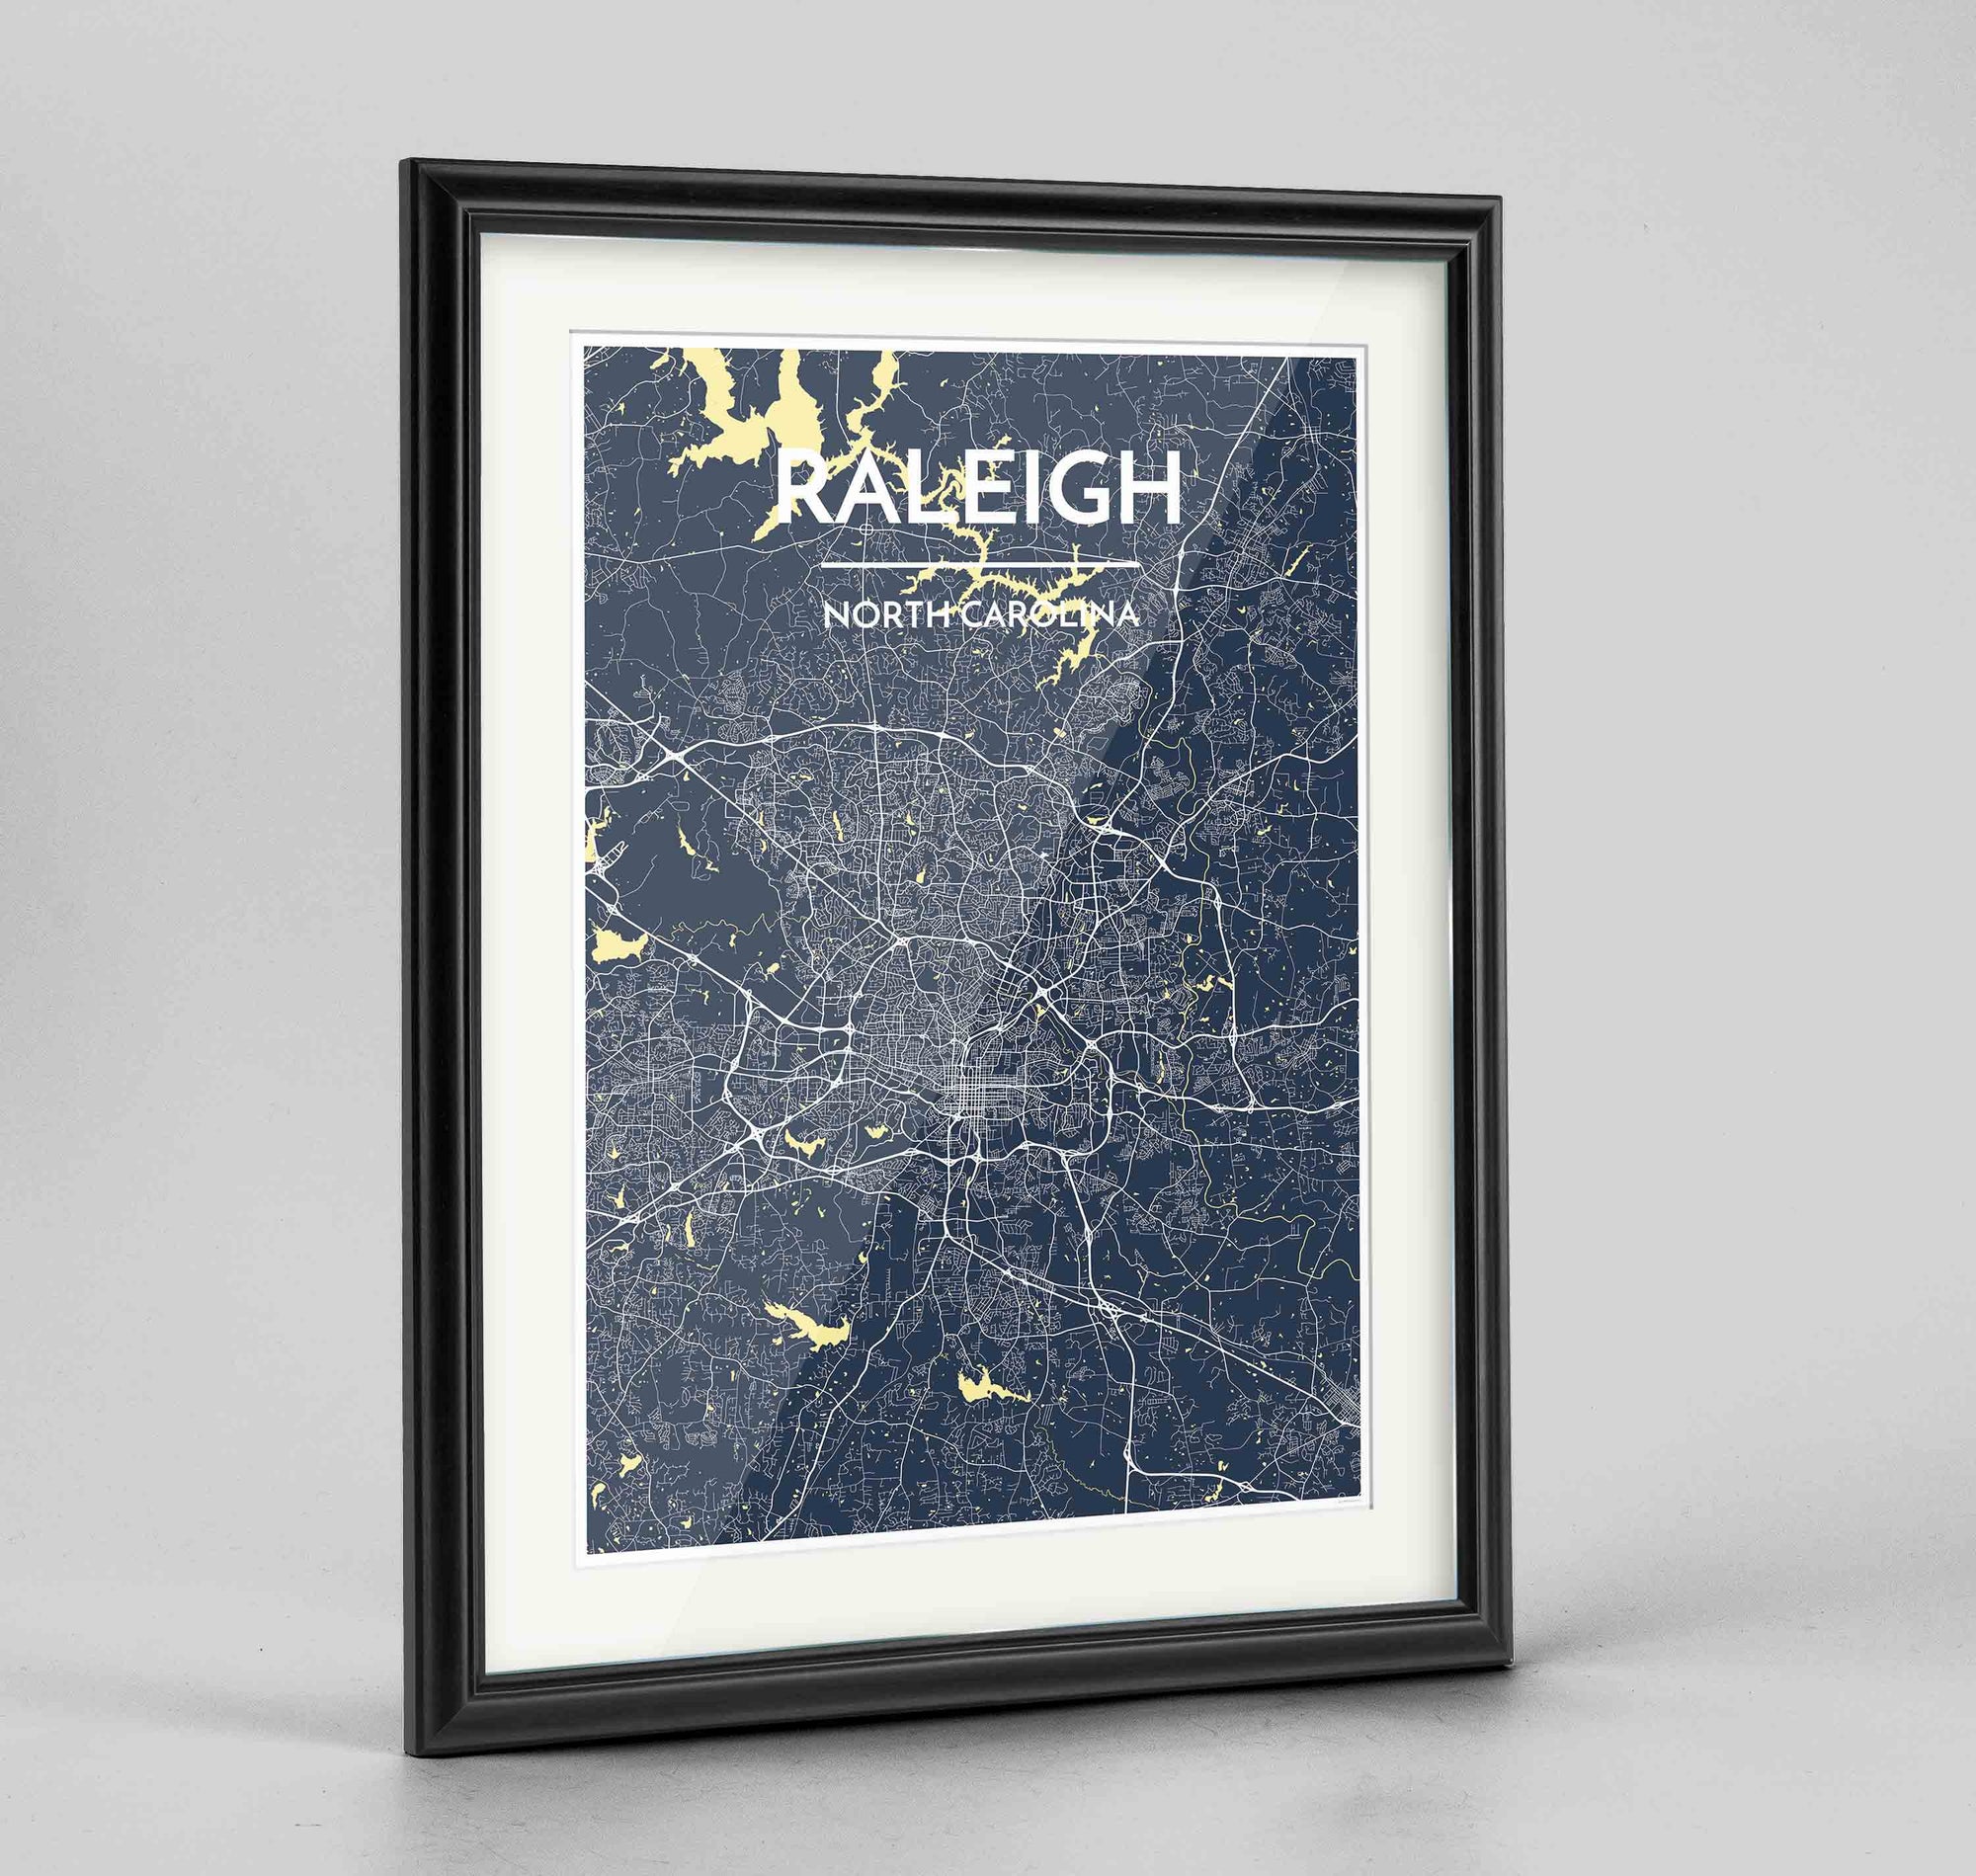 Framed Raleigh Map Art Print 24x36" Traditional Black frame Point Two Design Group